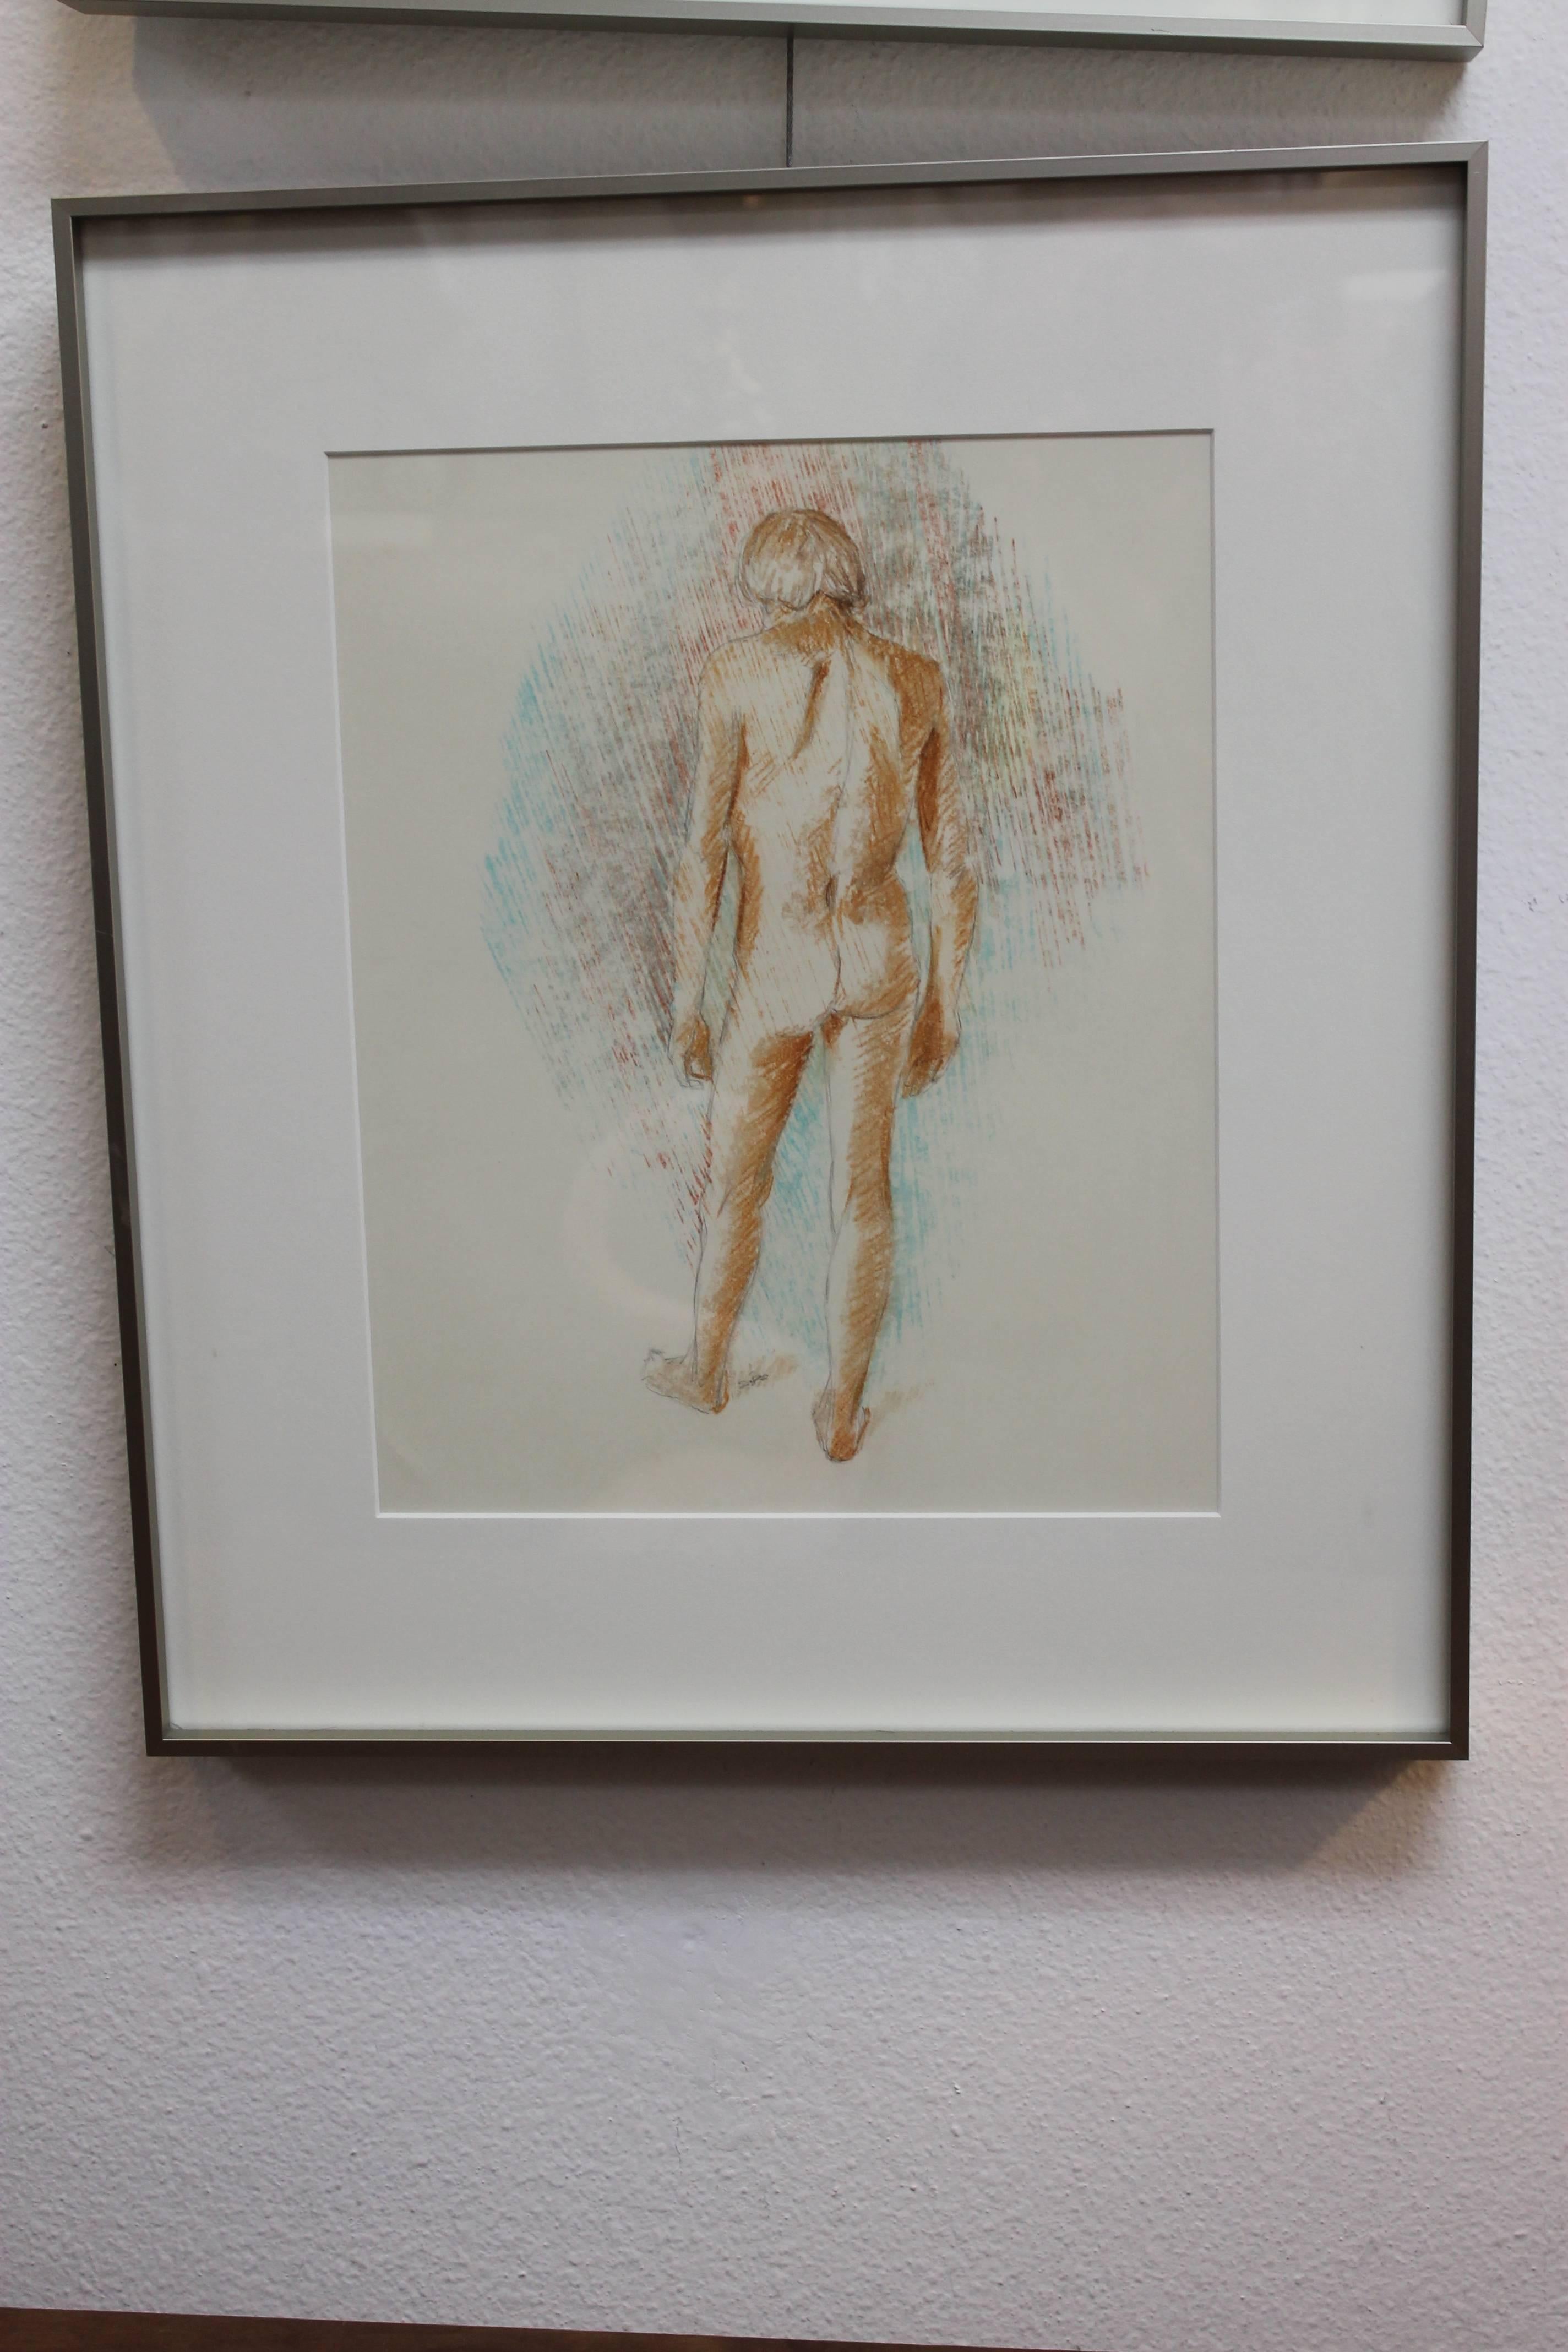 Duane Richard Raoul Faralla (1916 - 1996) nude drawing. We also have the front view available for sale. This drawing done with pencil and water color is unlike what Faralla is known for. He's known for sculptures made of recycled wood. Unframed it's